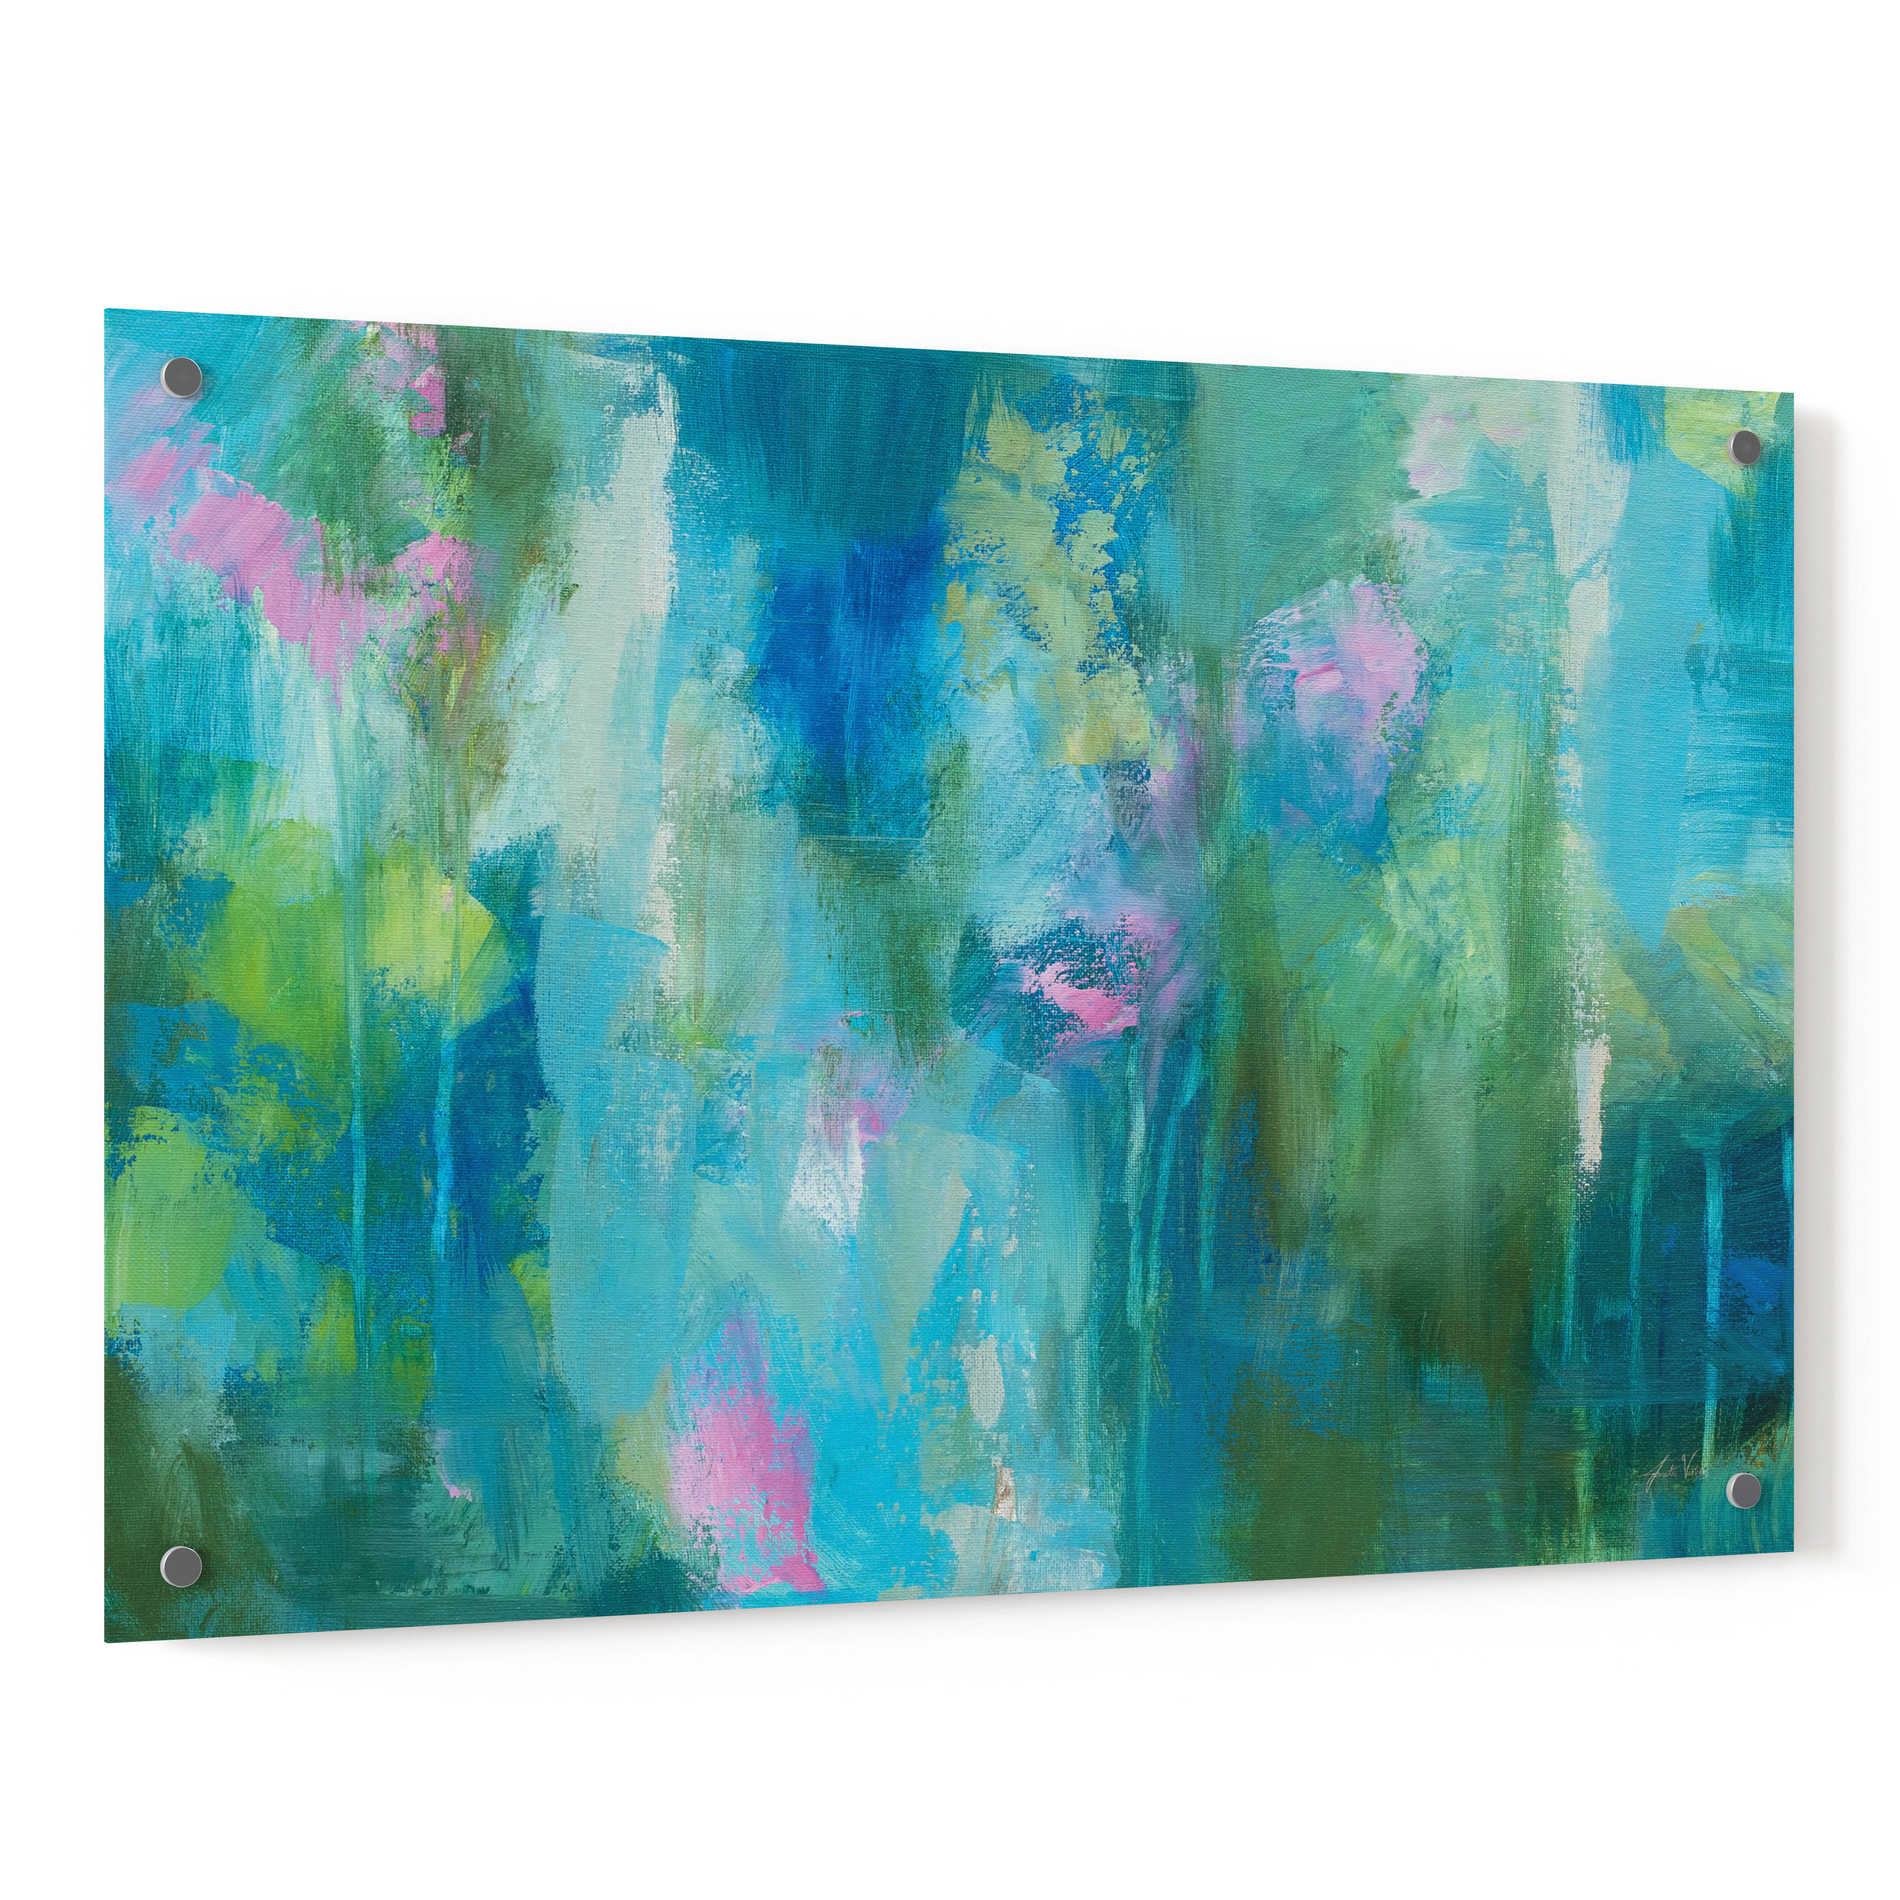 Epic Art 'Playful' by Jeanette Vertentes, Acrylic Glass Wall Art,36x24